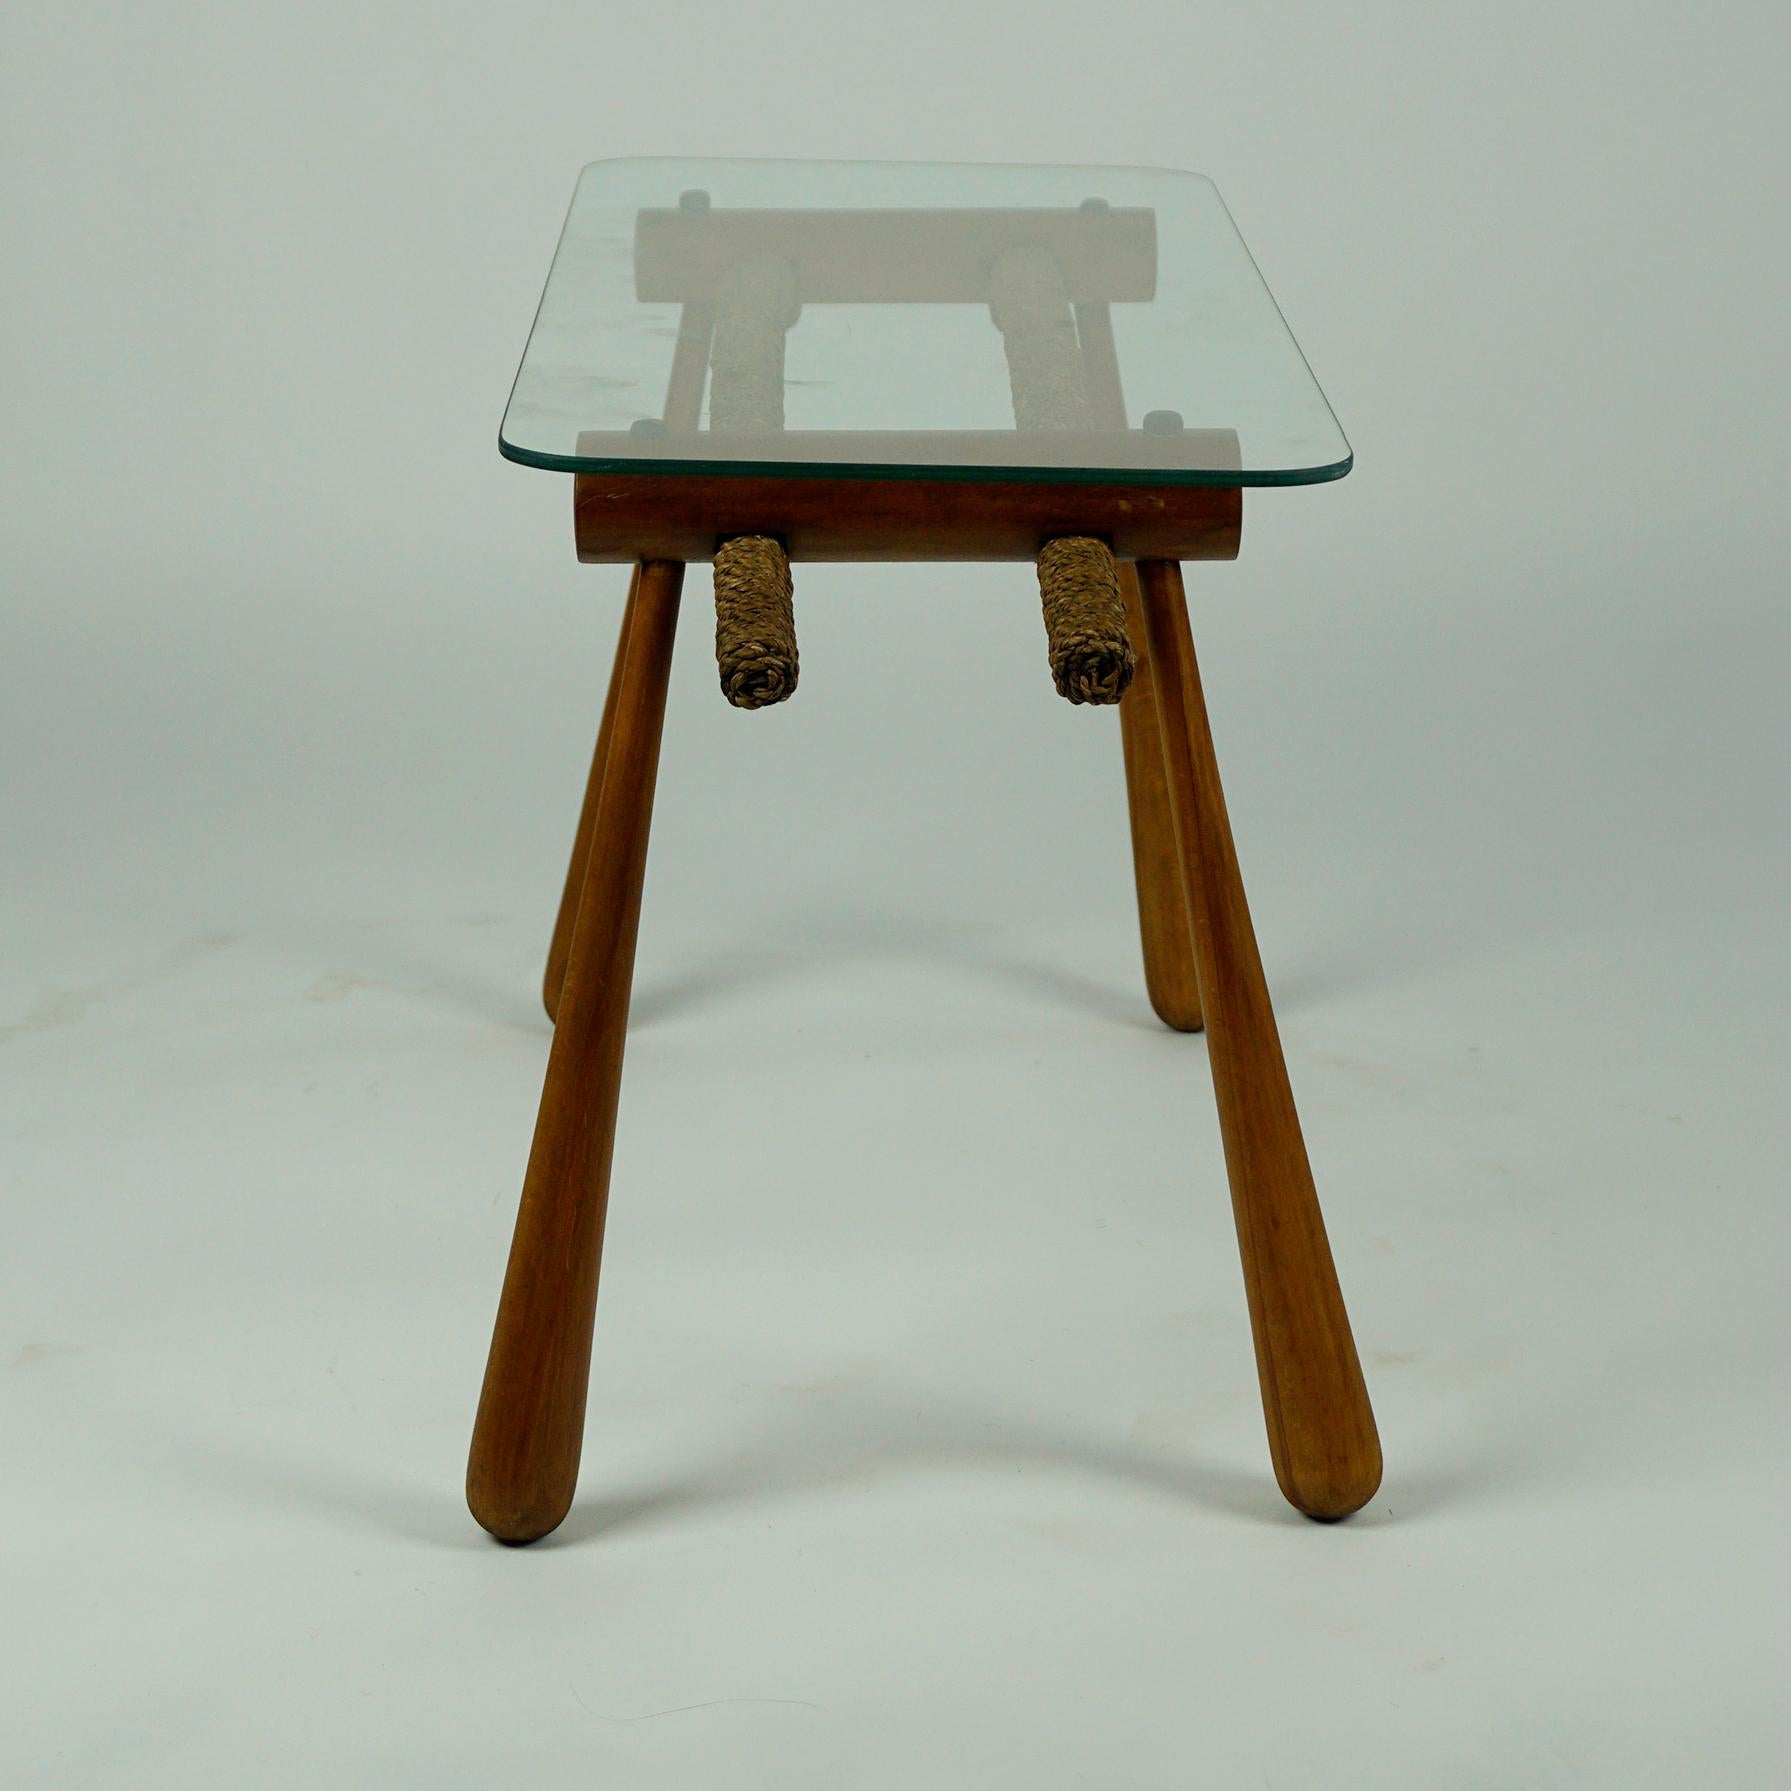 Austrian Midcentury Beechwood Side Table with Cord and Glass Top by Max Kment In Good Condition For Sale In Vienna, AT